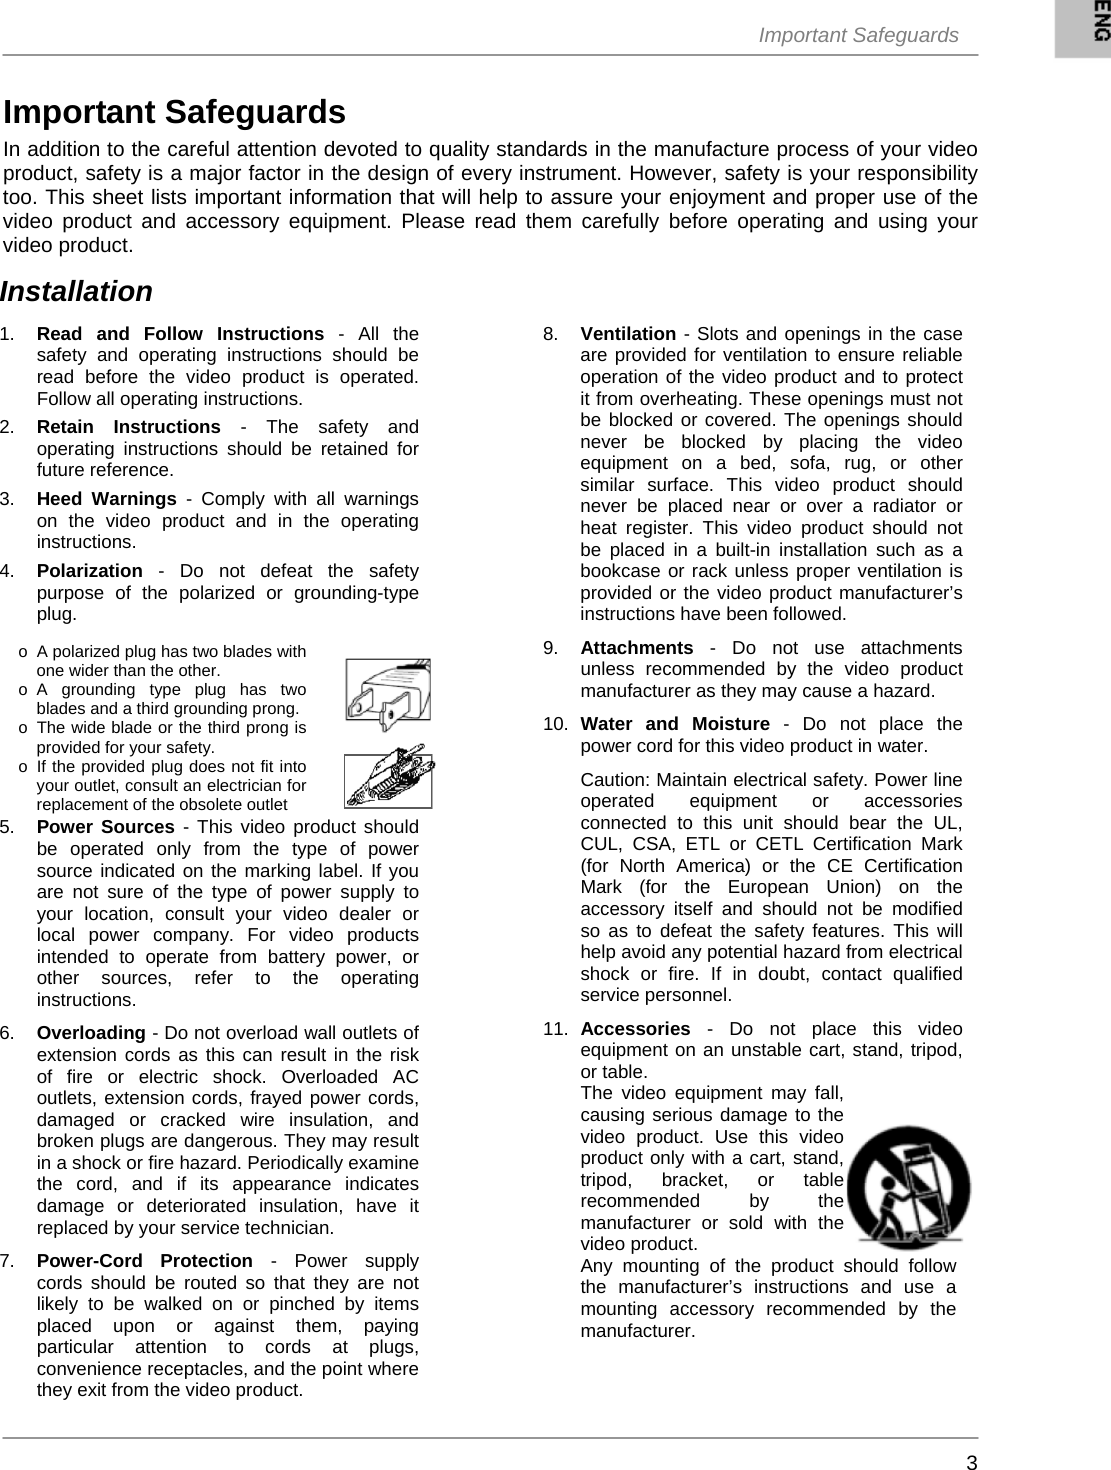  Important Safeguards     3Important Safeguards In addition to the careful attention devoted to quality standards in the manufacture process of your video product, safety is a major factor in the design of every instrument. However, safety is your responsibility too. This sheet lists important information that will help to assure your enjoyment and proper use of the video product and accessory equipment. Please read them carefully before operating and using your video product.    1.  Read and Follow Instructions - All the safety and operating instructions should be read before the video product is operated. Follow all operating instructions.  2.  Retain Instructions - The safety and operating instructions should be retained for future reference.  3.  Heed Warnings - Comply with all warnings on the video product and in the operating instructions.  4.  Polarization - Do not defeat the safety purpose of the polarized or grounding-type plug.                 5.  Power Sources - This video product should be operated only from the type of power source indicated on the marking label. If you are not sure of the type of power supply to your location, consult your video dealer or local power company. For video products intended to operate from battery power, or other sources, refer to the operating instructions.  6.  Overloading - Do not overload wall outlets of extension cords as this can result in the risk of fire or electric shock. Overloaded AC outlets, extension cords, frayed power cords, damaged or cracked wire insulation, and broken plugs are dangerous. They may result in a shock or fire hazard. Periodically examine the cord, and if its appearance indicates damage or deteriorated insulation, have it replaced by your service technician.  7.  Power-Cord Protection - Power supply cords should be routed so that they are not likely to be walked on or pinched by items placed upon or against them, paying particular attention to cords at plugs, convenience receptacles, and the point where they exit from the video product. 8. Ventilation - Slots and openings in the case are provided for ventilation to ensure reliable operation of the video product and to protect it from overheating. These openings must not be blocked or covered. The openings should never be blocked by placing the video equipment on a bed, sofa, rug, or other similar surface. This video product should never be placed near or over a radiator or heat register. This video product should not be placed in a built-in installation such as a bookcase or rack unless proper ventilation is provided or the video product manufacturer’s instructions have been followed.  9.  Attachments - Do not use attachments unless recommended by the video product manufacturer as they may cause a hazard.  10.  Water and Moisture - Do not place the power cord for this video product in water.   Caution: Maintain electrical safety. Power line operated equipment or accessories connected to this unit should bear the UL, CUL, CSA, ETL or CETL Certification Mark (for North America) or the CE Certification Mark (for the European Union) on the accessory itself and should not be modified so as to defeat the safety features. This will help avoid any potential hazard from electrical shock or fire. If in doubt, contact qualified service personnel.  11.  Accessories - Do not place this video equipment on an unstable cart, stand, tripod, or table.  The video equipment may fall, causing serious damage to the video product. Use this video product only with a cart, stand, tripod, bracket, or table recommended by the manufacturer or sold with the video product.  Any mounting of the product should follow the manufacturer’s instructions and use a mounting accessory recommended by the manufacturer.  Installation o  A polarized plug has two blades with one wider than the other. o A grounding type plug has two blades and a third grounding prong. o  The wide blade or the third prong is provided for your safety. o  If the provided plug does not fit into your outlet, consult an electrician for replacement of the obsolete outlet 